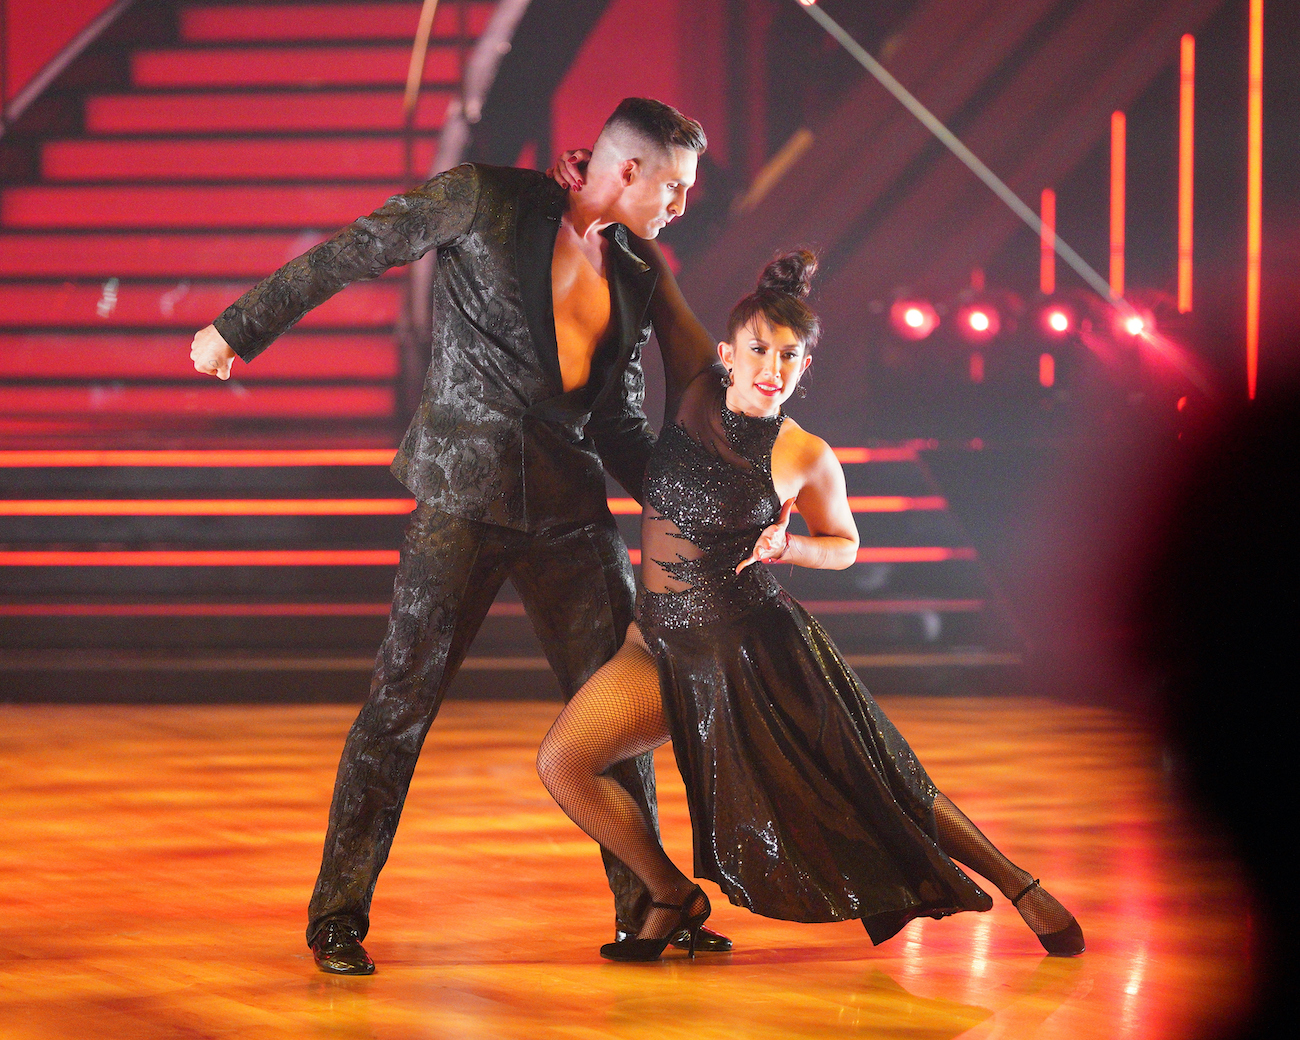 Cody Rigsby and Cheryl Burke performing during the 'Dancing with the Stars' Season 30 semi-finals